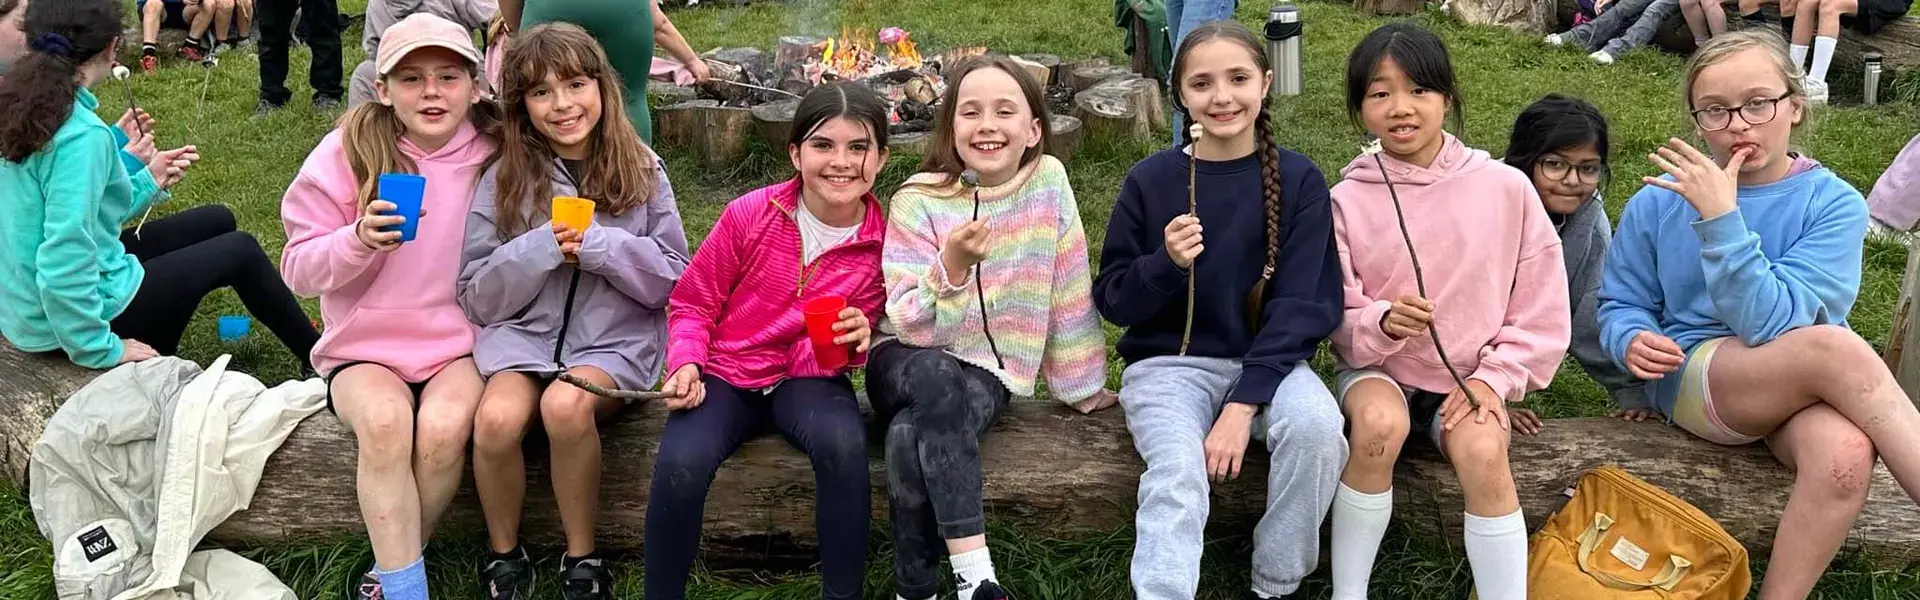 Prep pupils enjoying a camp fire| Ibstock Place School, a private school near Richmond, Barnes, Putney, Kingston, and Wandsworth.